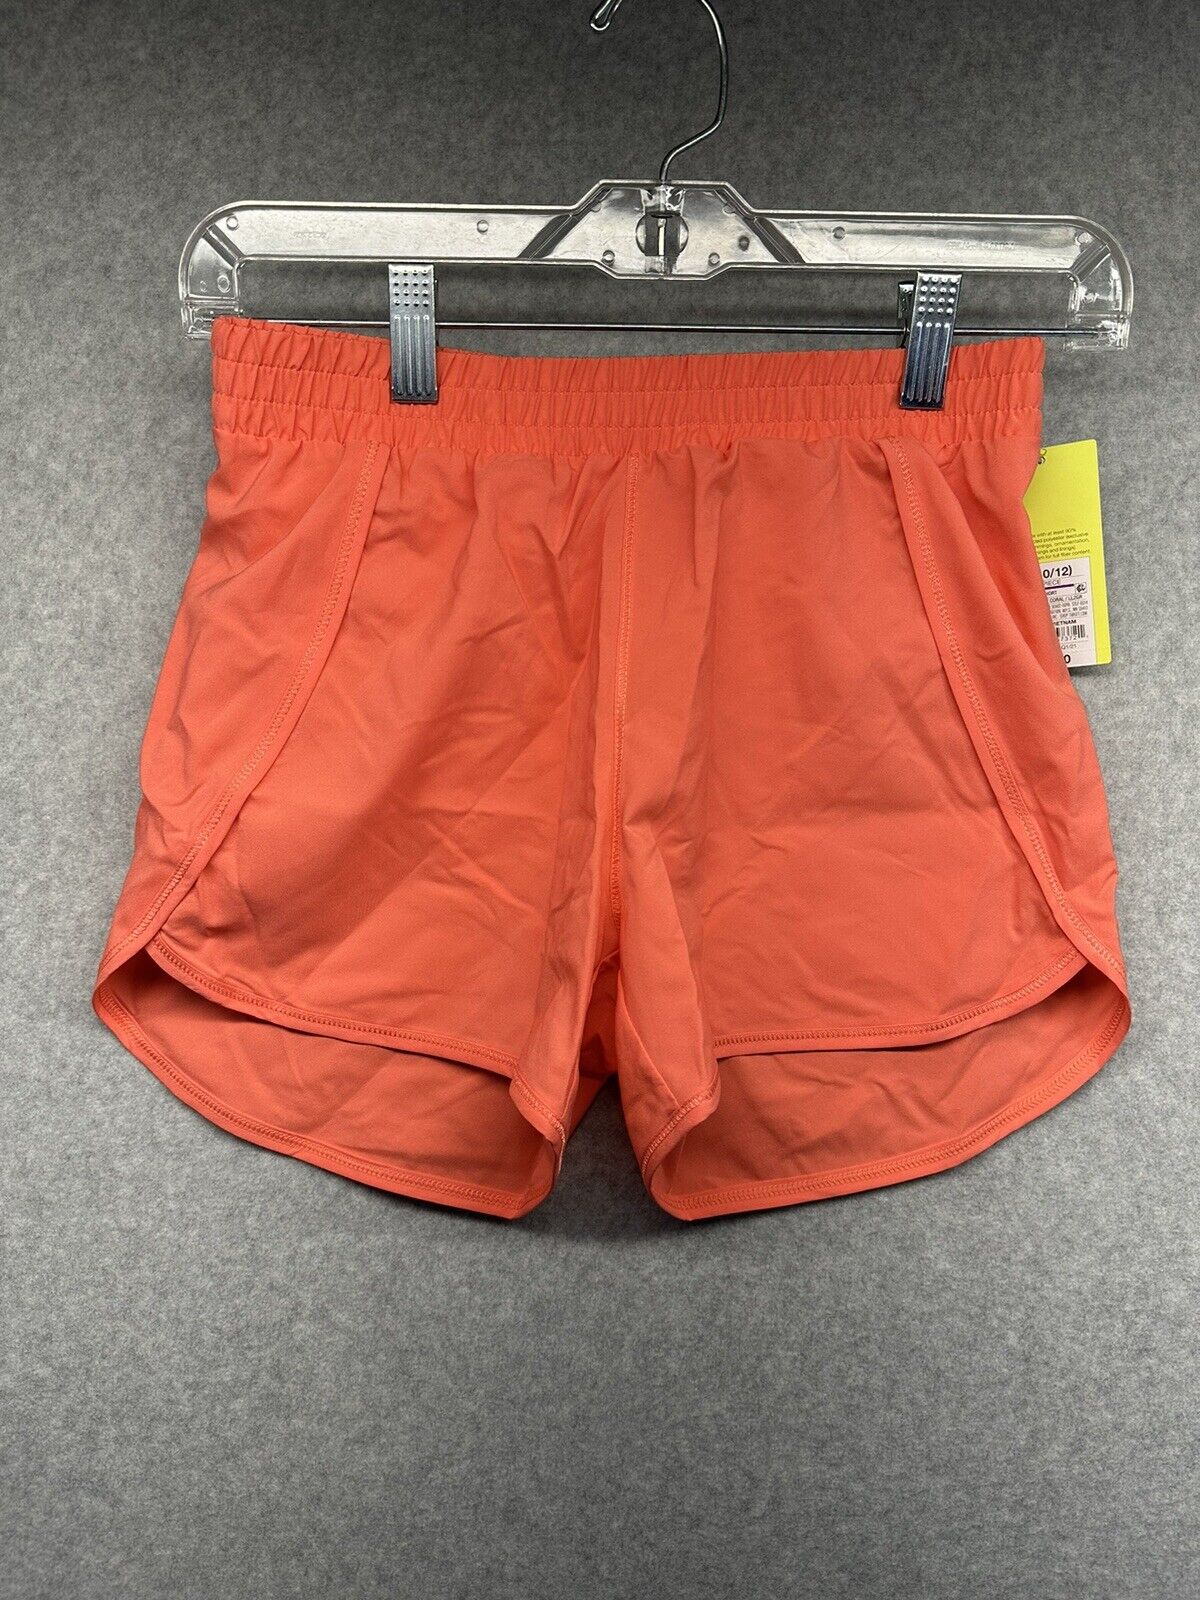 All in Motion Teen Girl Running Shorts Size Large (10/12) Coral Lightweight NWT